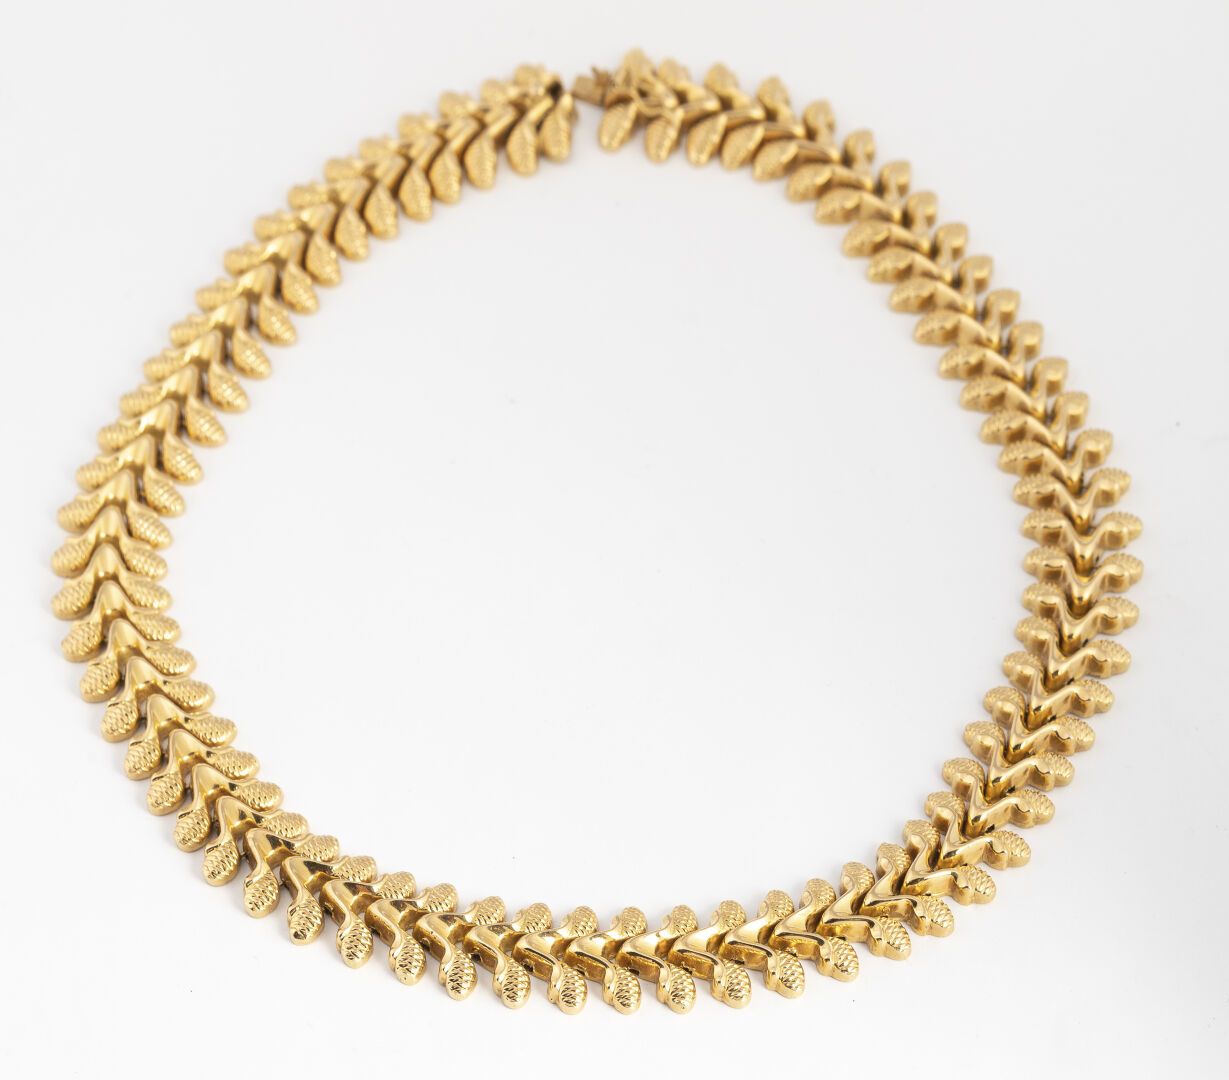 Null DRAPERY NECKLACE

In gold 750°/°°

With articulated links of stylized folia&hellip;